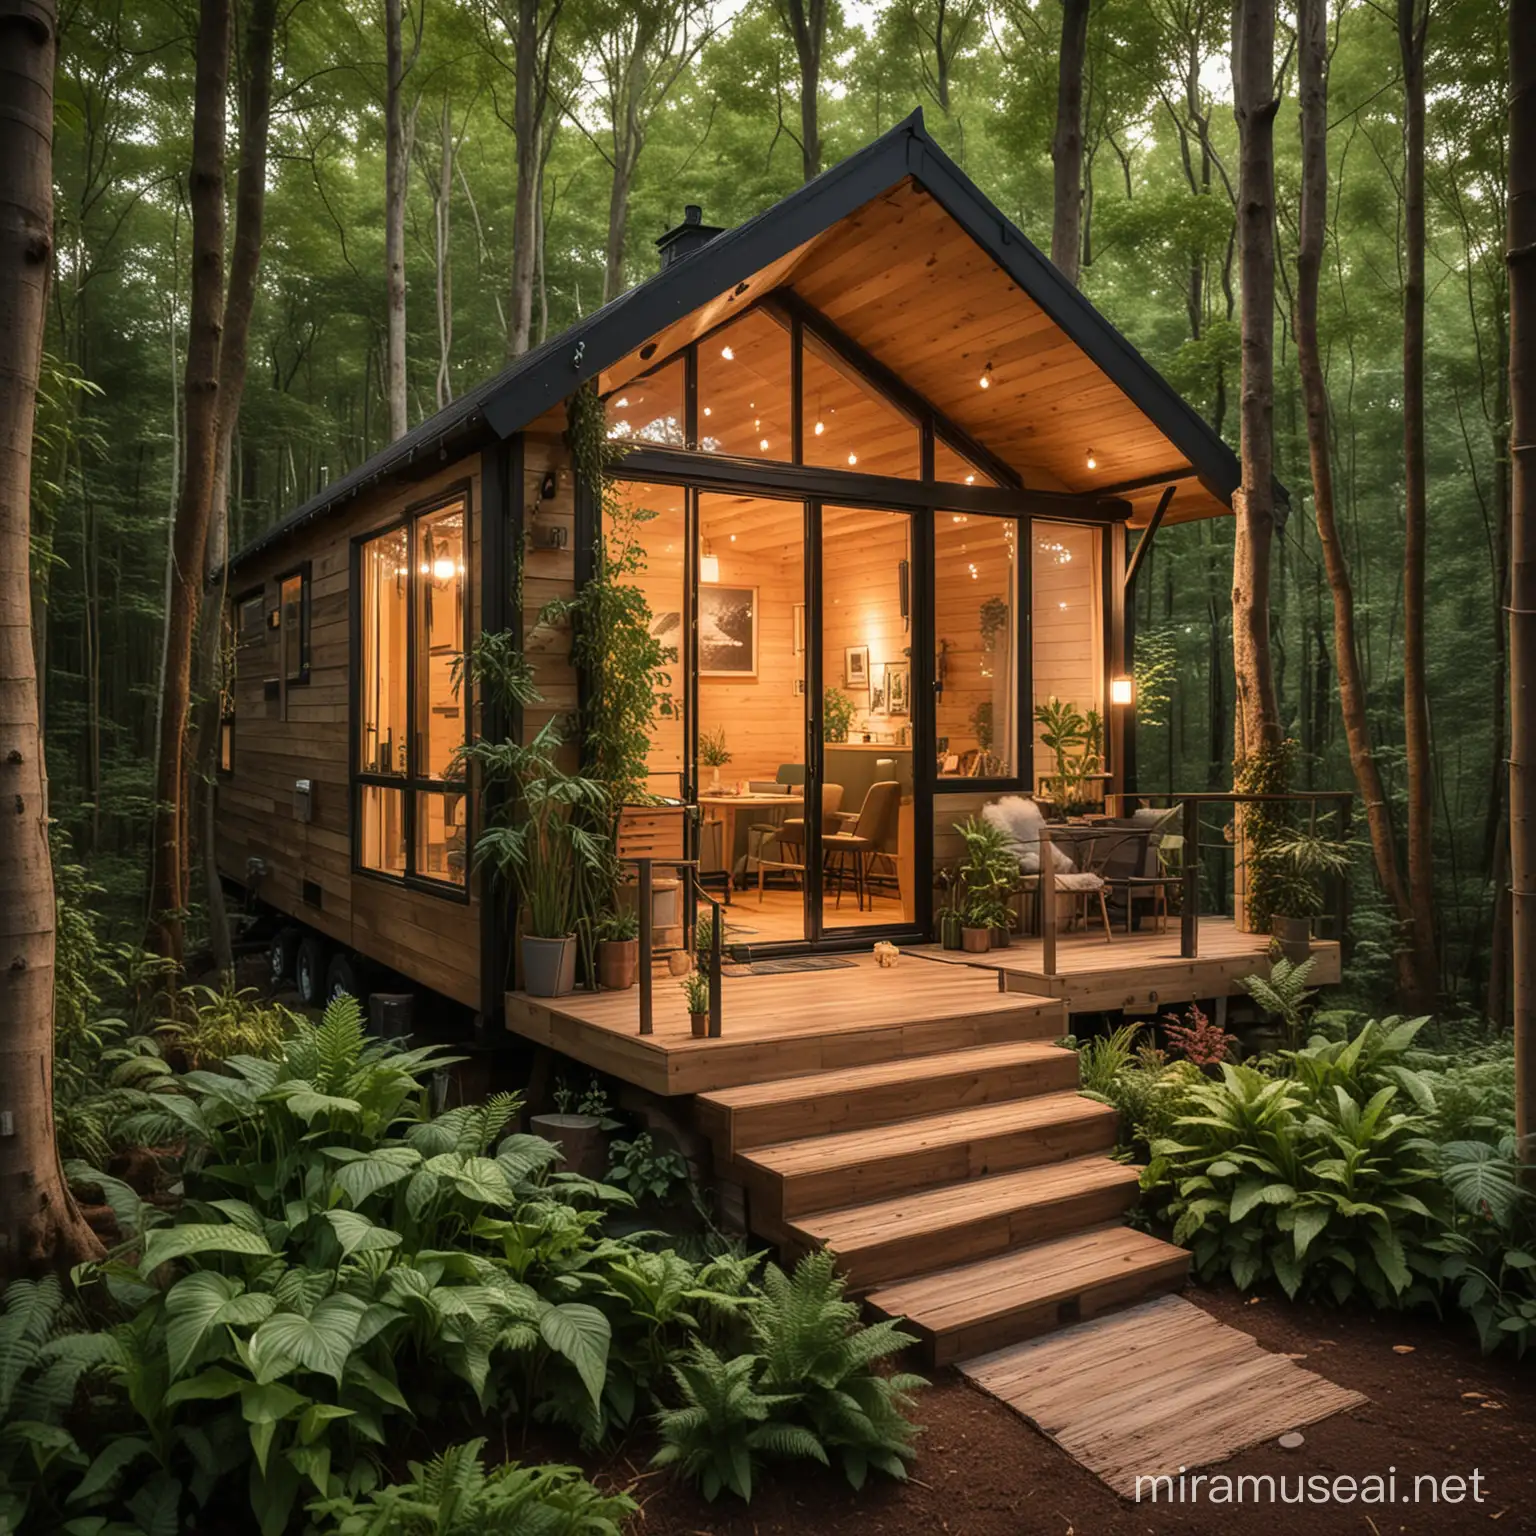 EcoFriendly Tiny Home in Serene Forest Setting